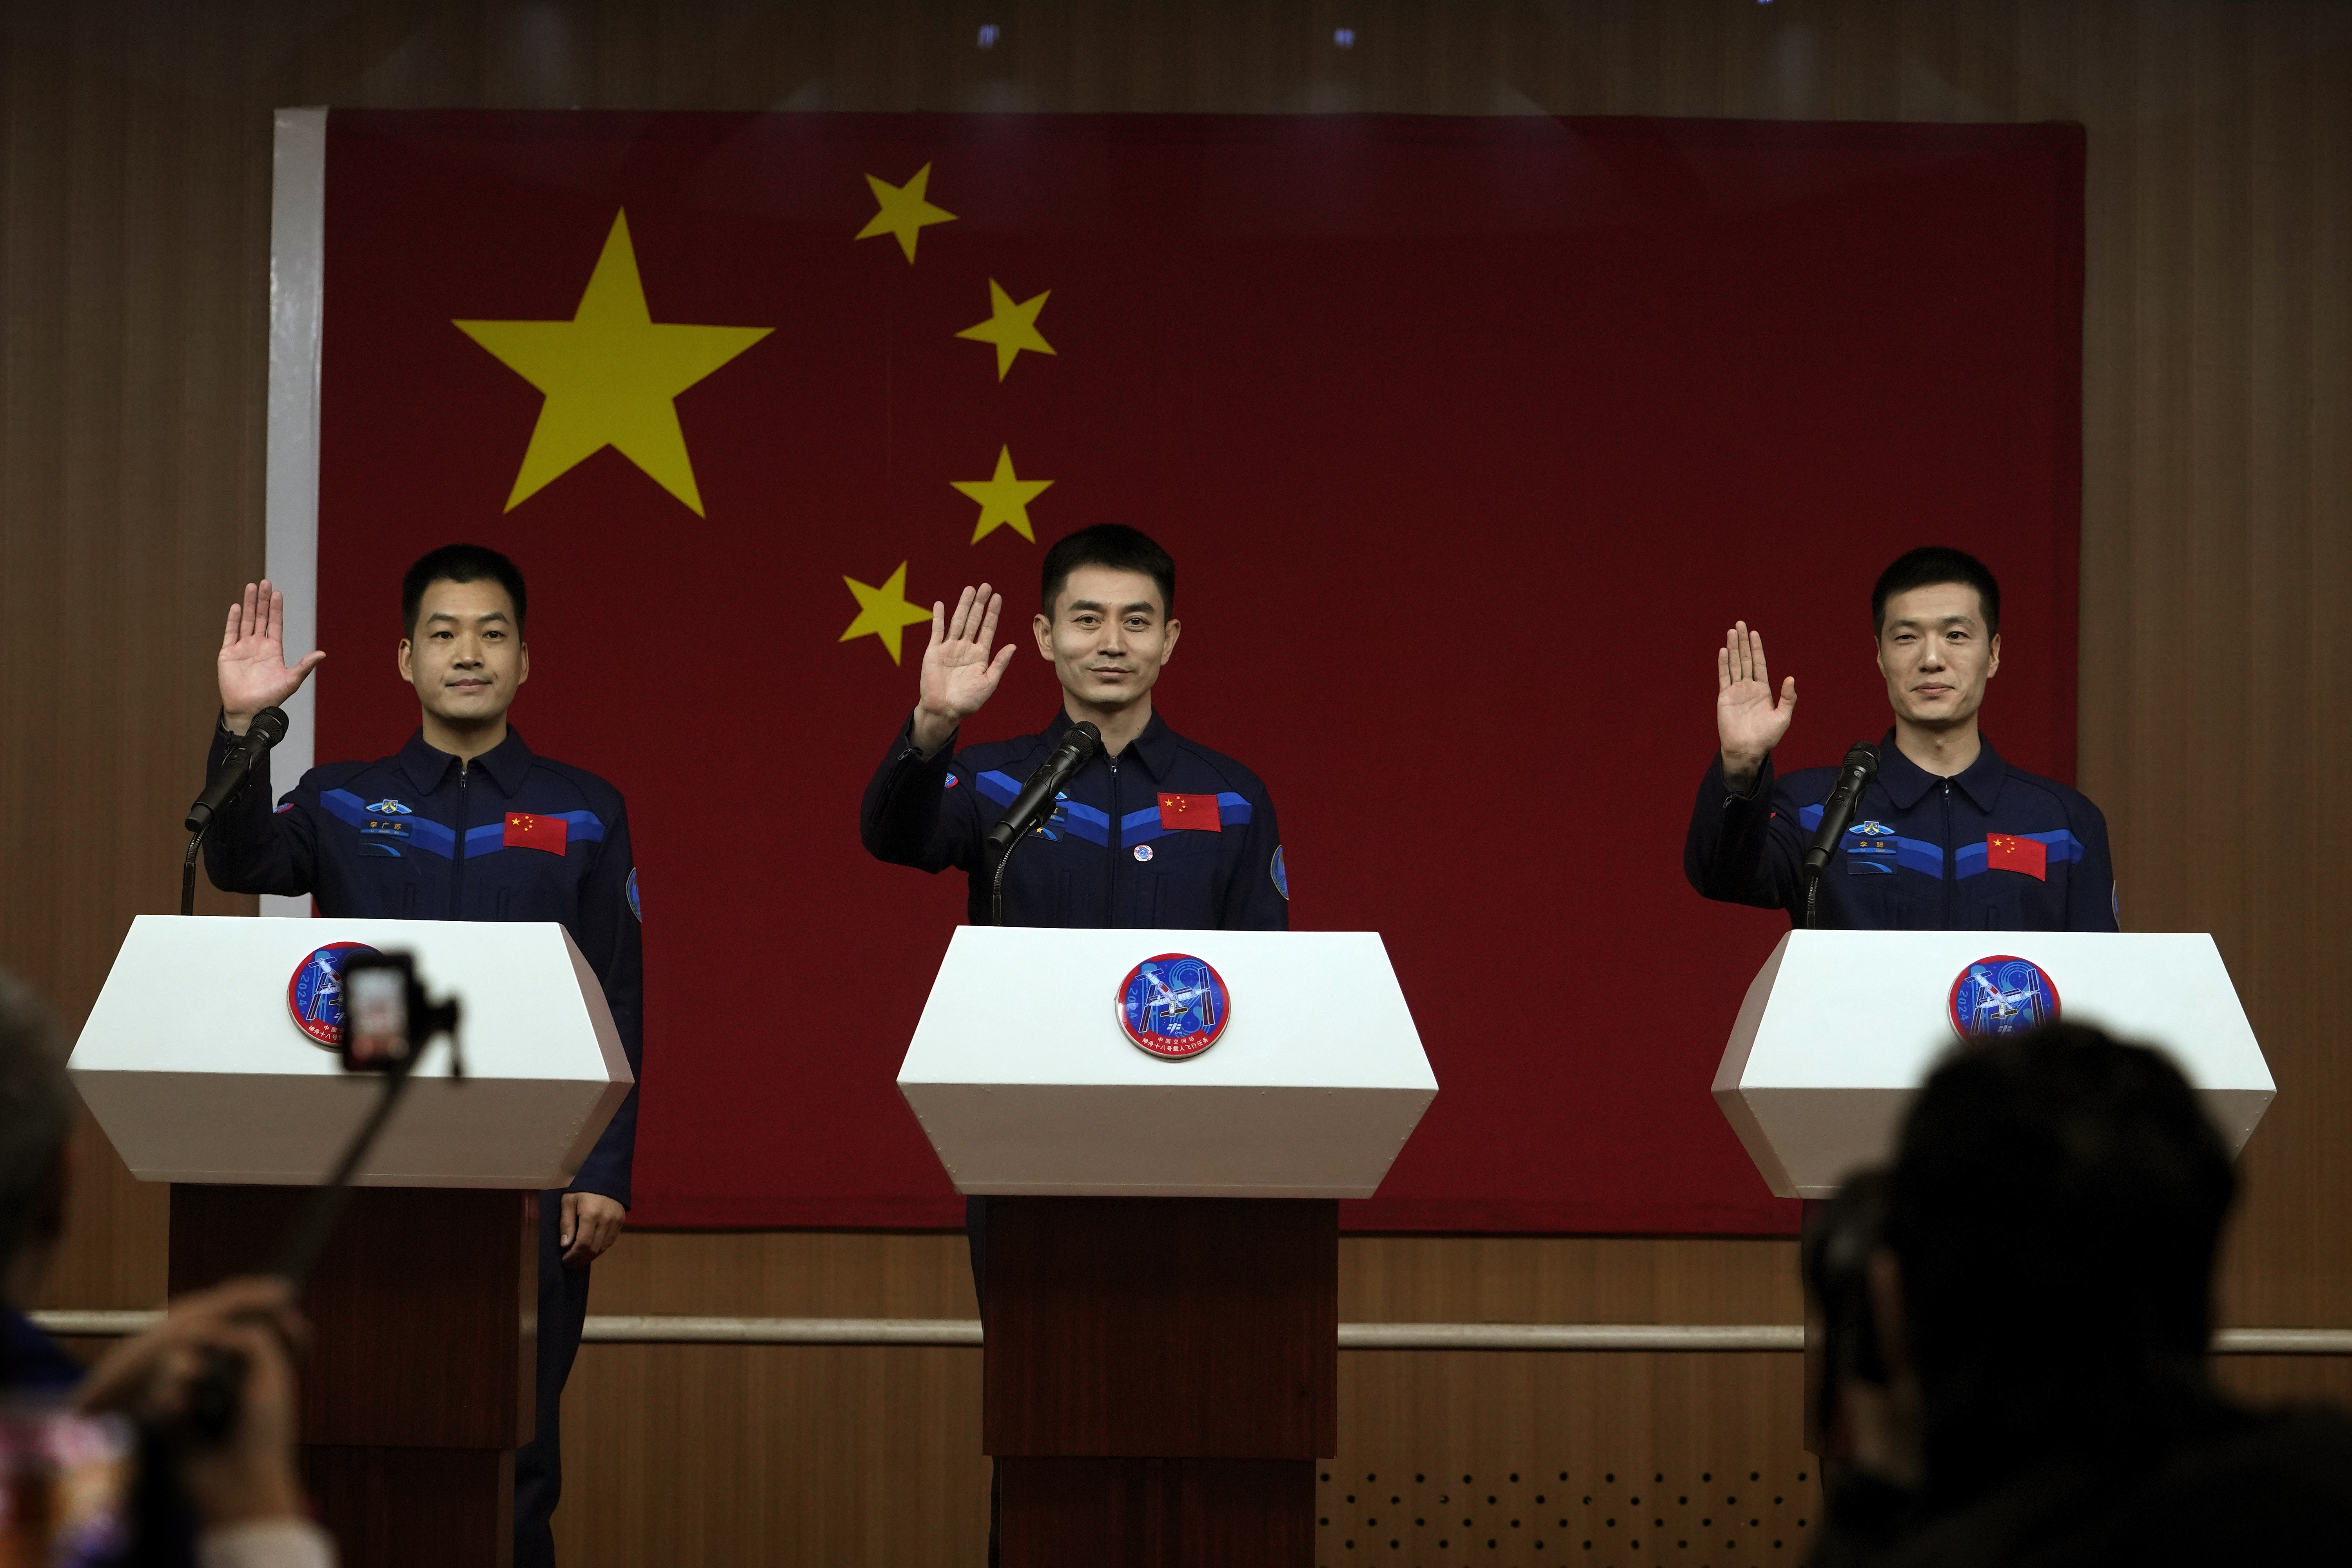 Chinese astronauts for the upcoming Shenzhou-18 mission, Li Guangsu, Ye Guangfu and Li Cong wave as they arrive for a meeting at the Jiuquan Satellite Launch Center in northwest China, April 24, 2024./Andy Wong/AP